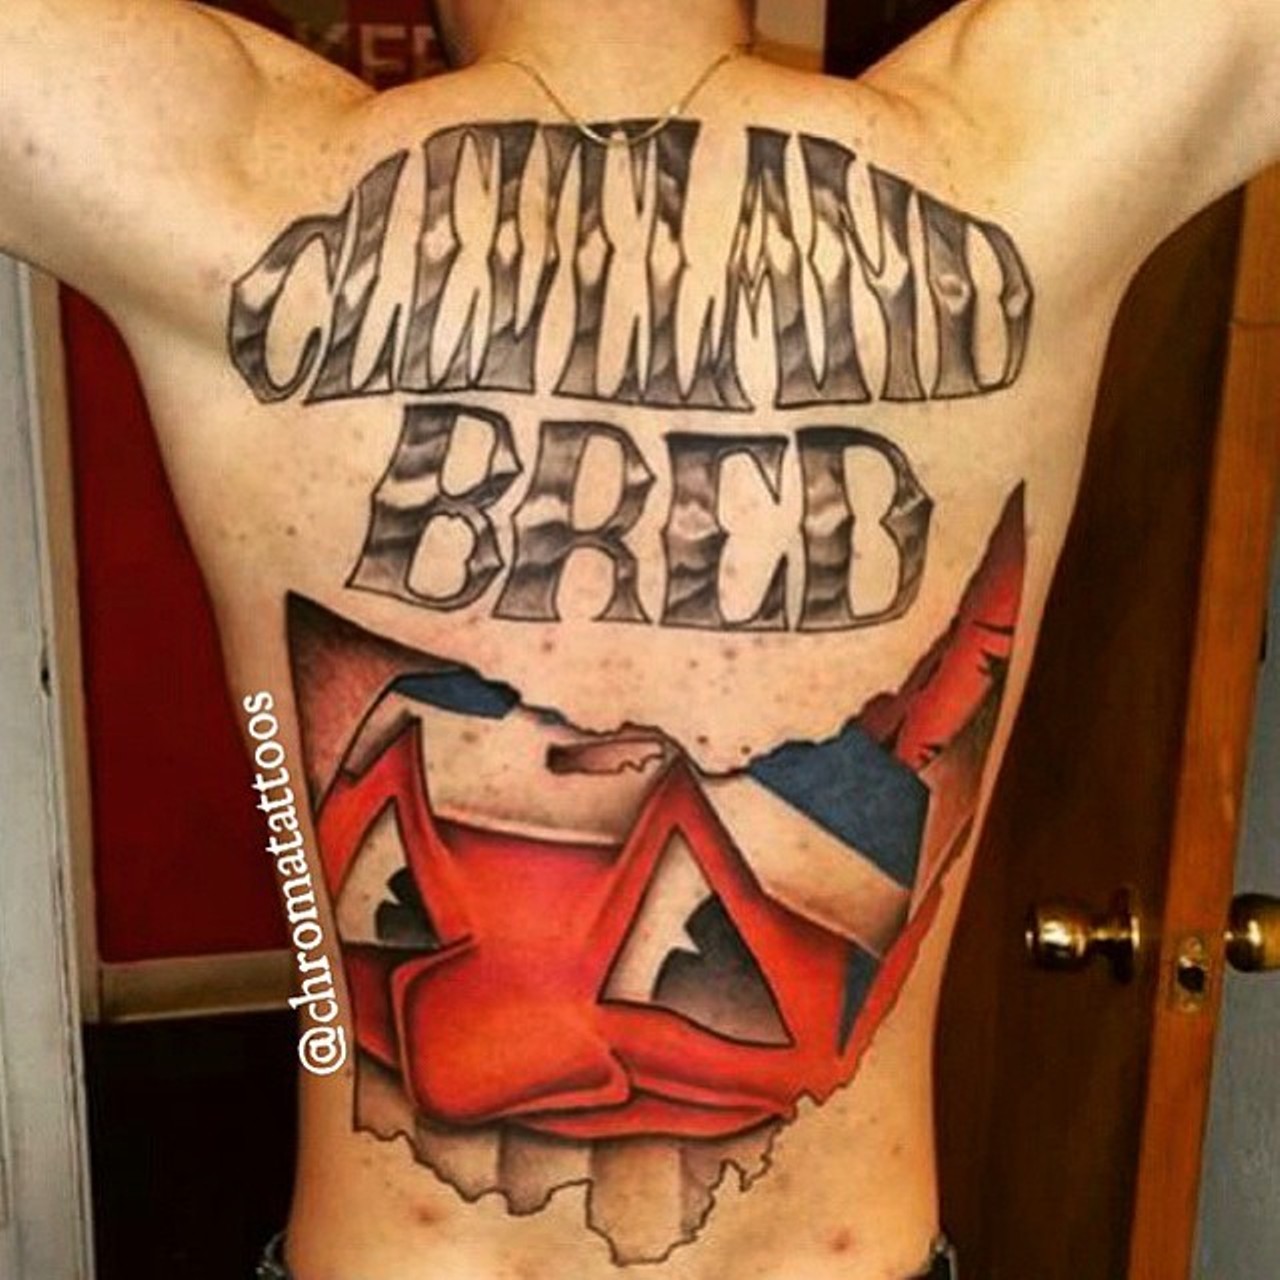 This tattoo oozes Cleveland pride in a big way. Chief Wahoo beams his iconic smile in a frame of the Buckeye State (Photo courtesy of Instagram user @galleria1796).